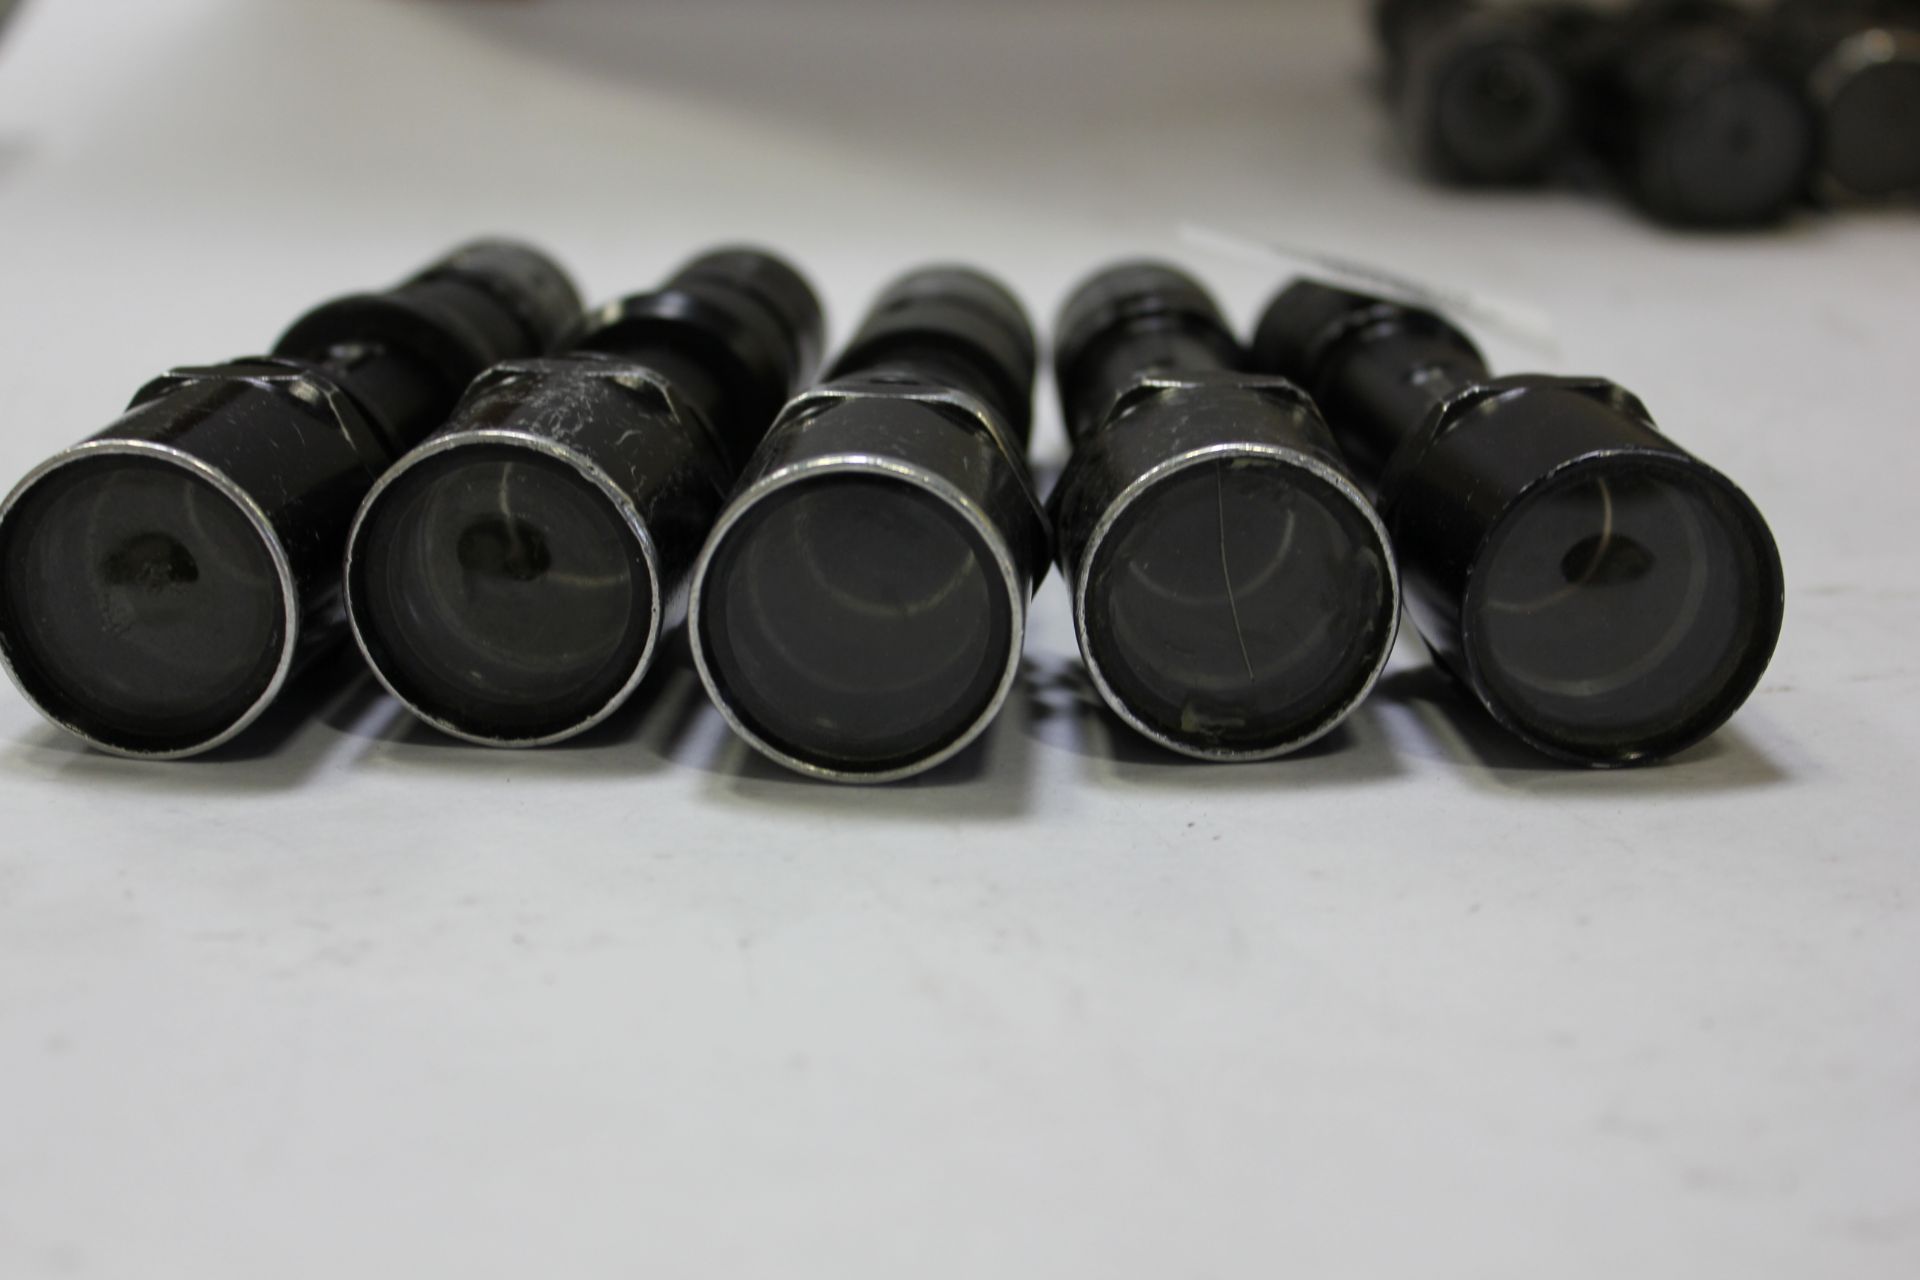 LOT OF SURE FIRE TACTICAL FLASH LIGHTS - Image 2 of 4